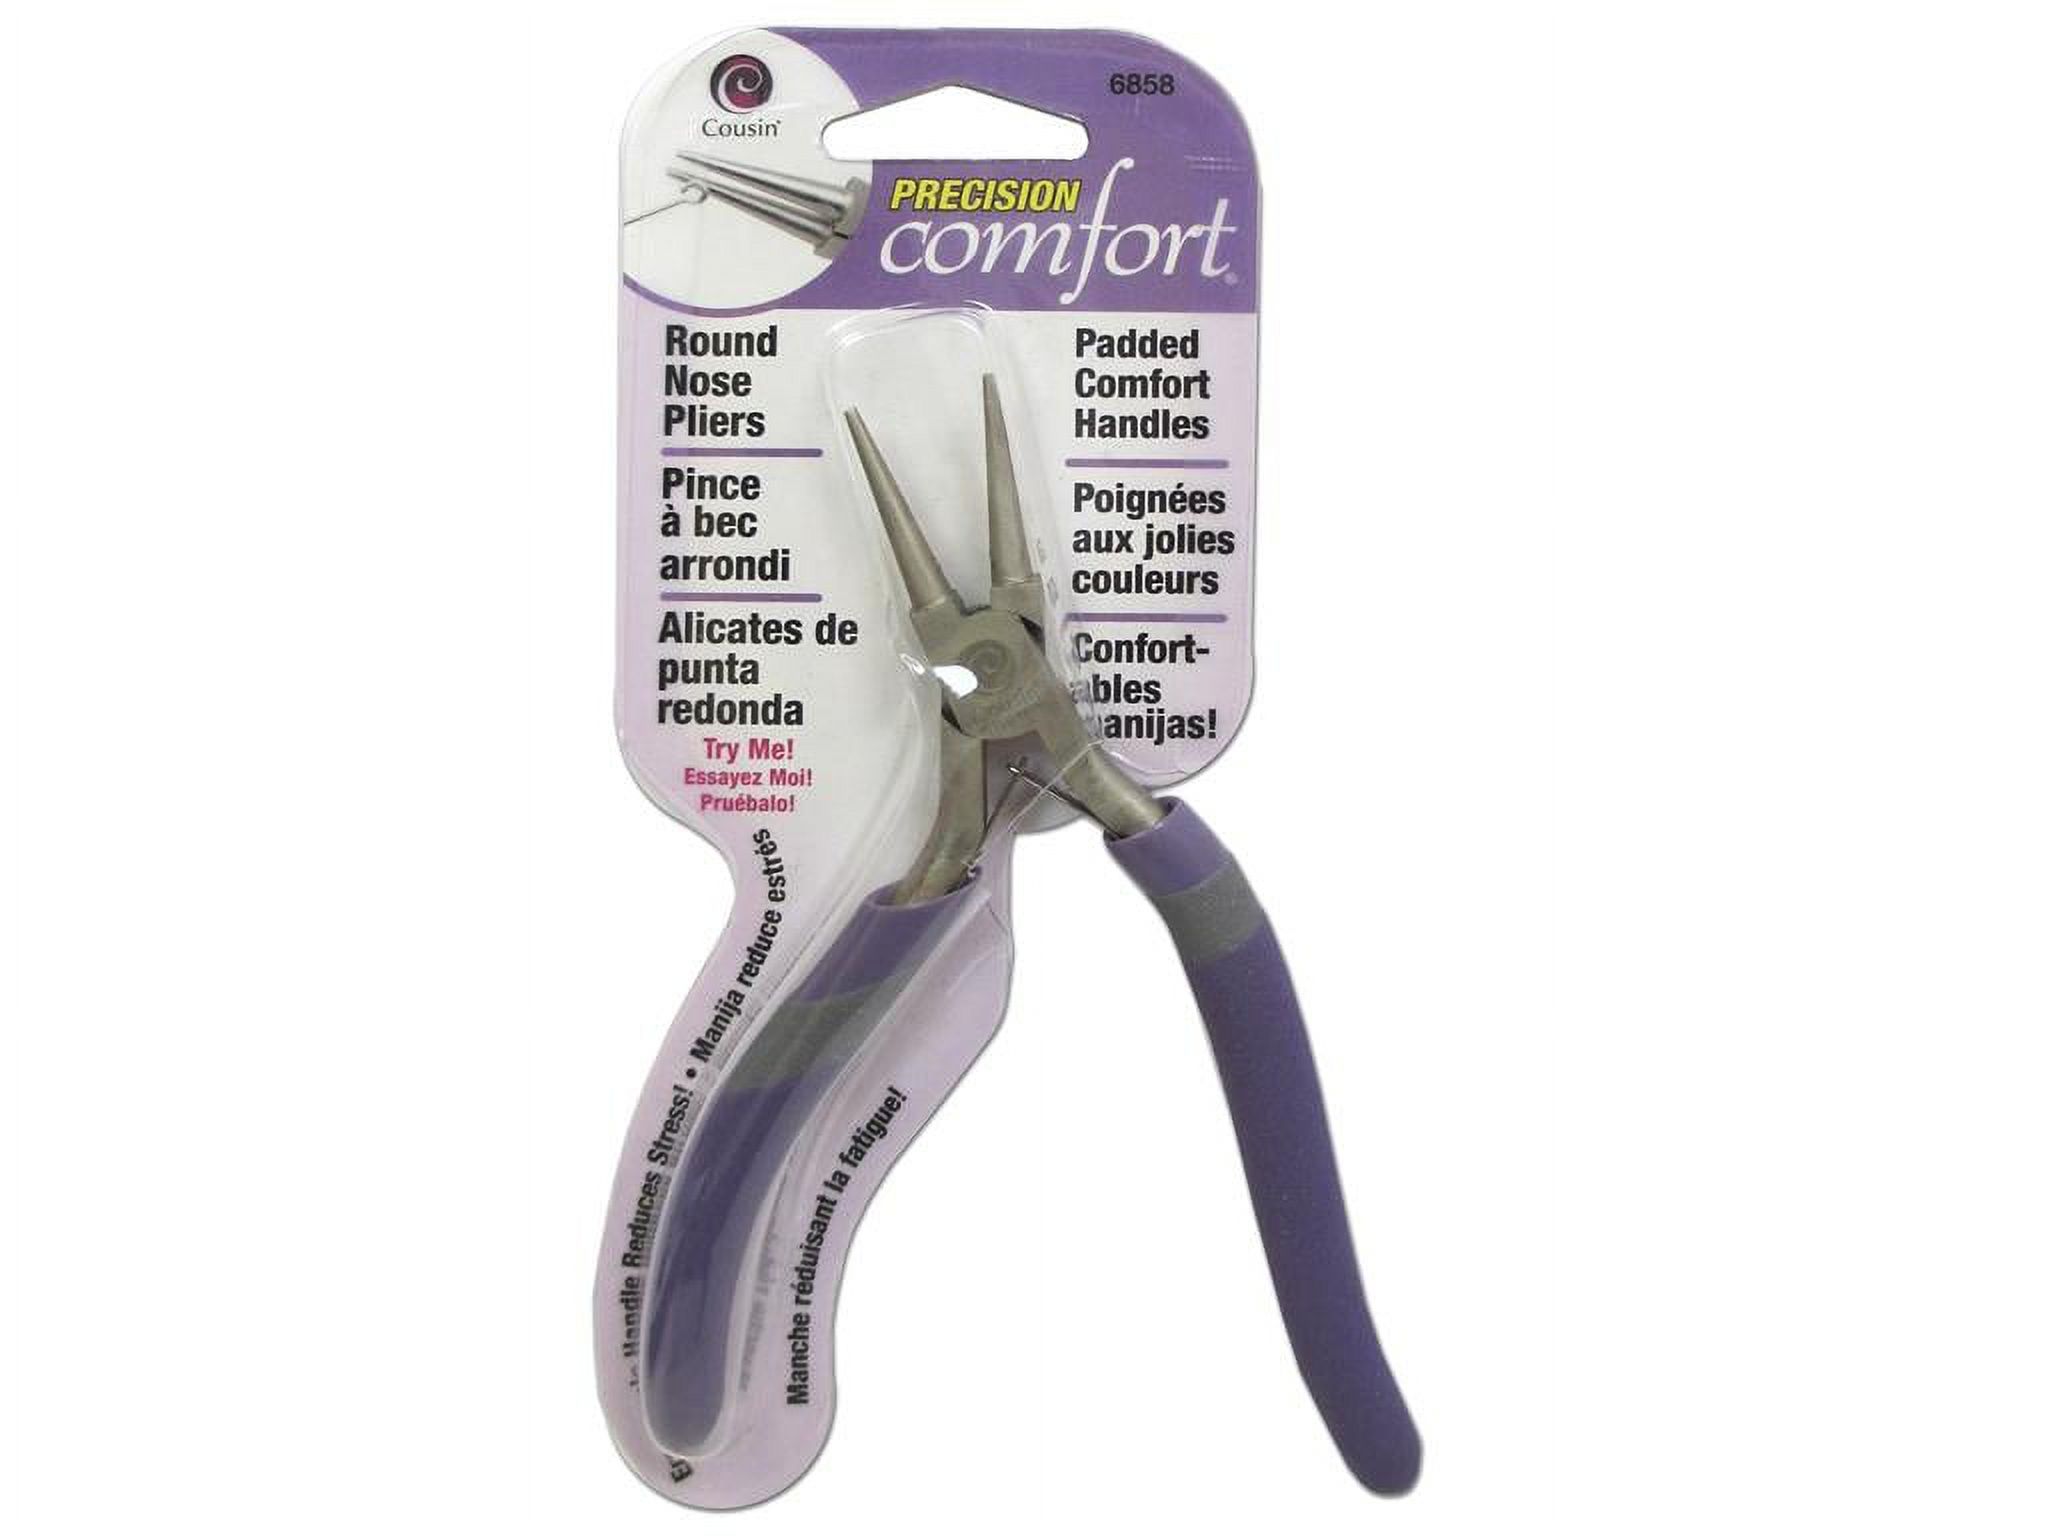 Cousin Precision Comfort Round Nose Pliers - image 1 of 3